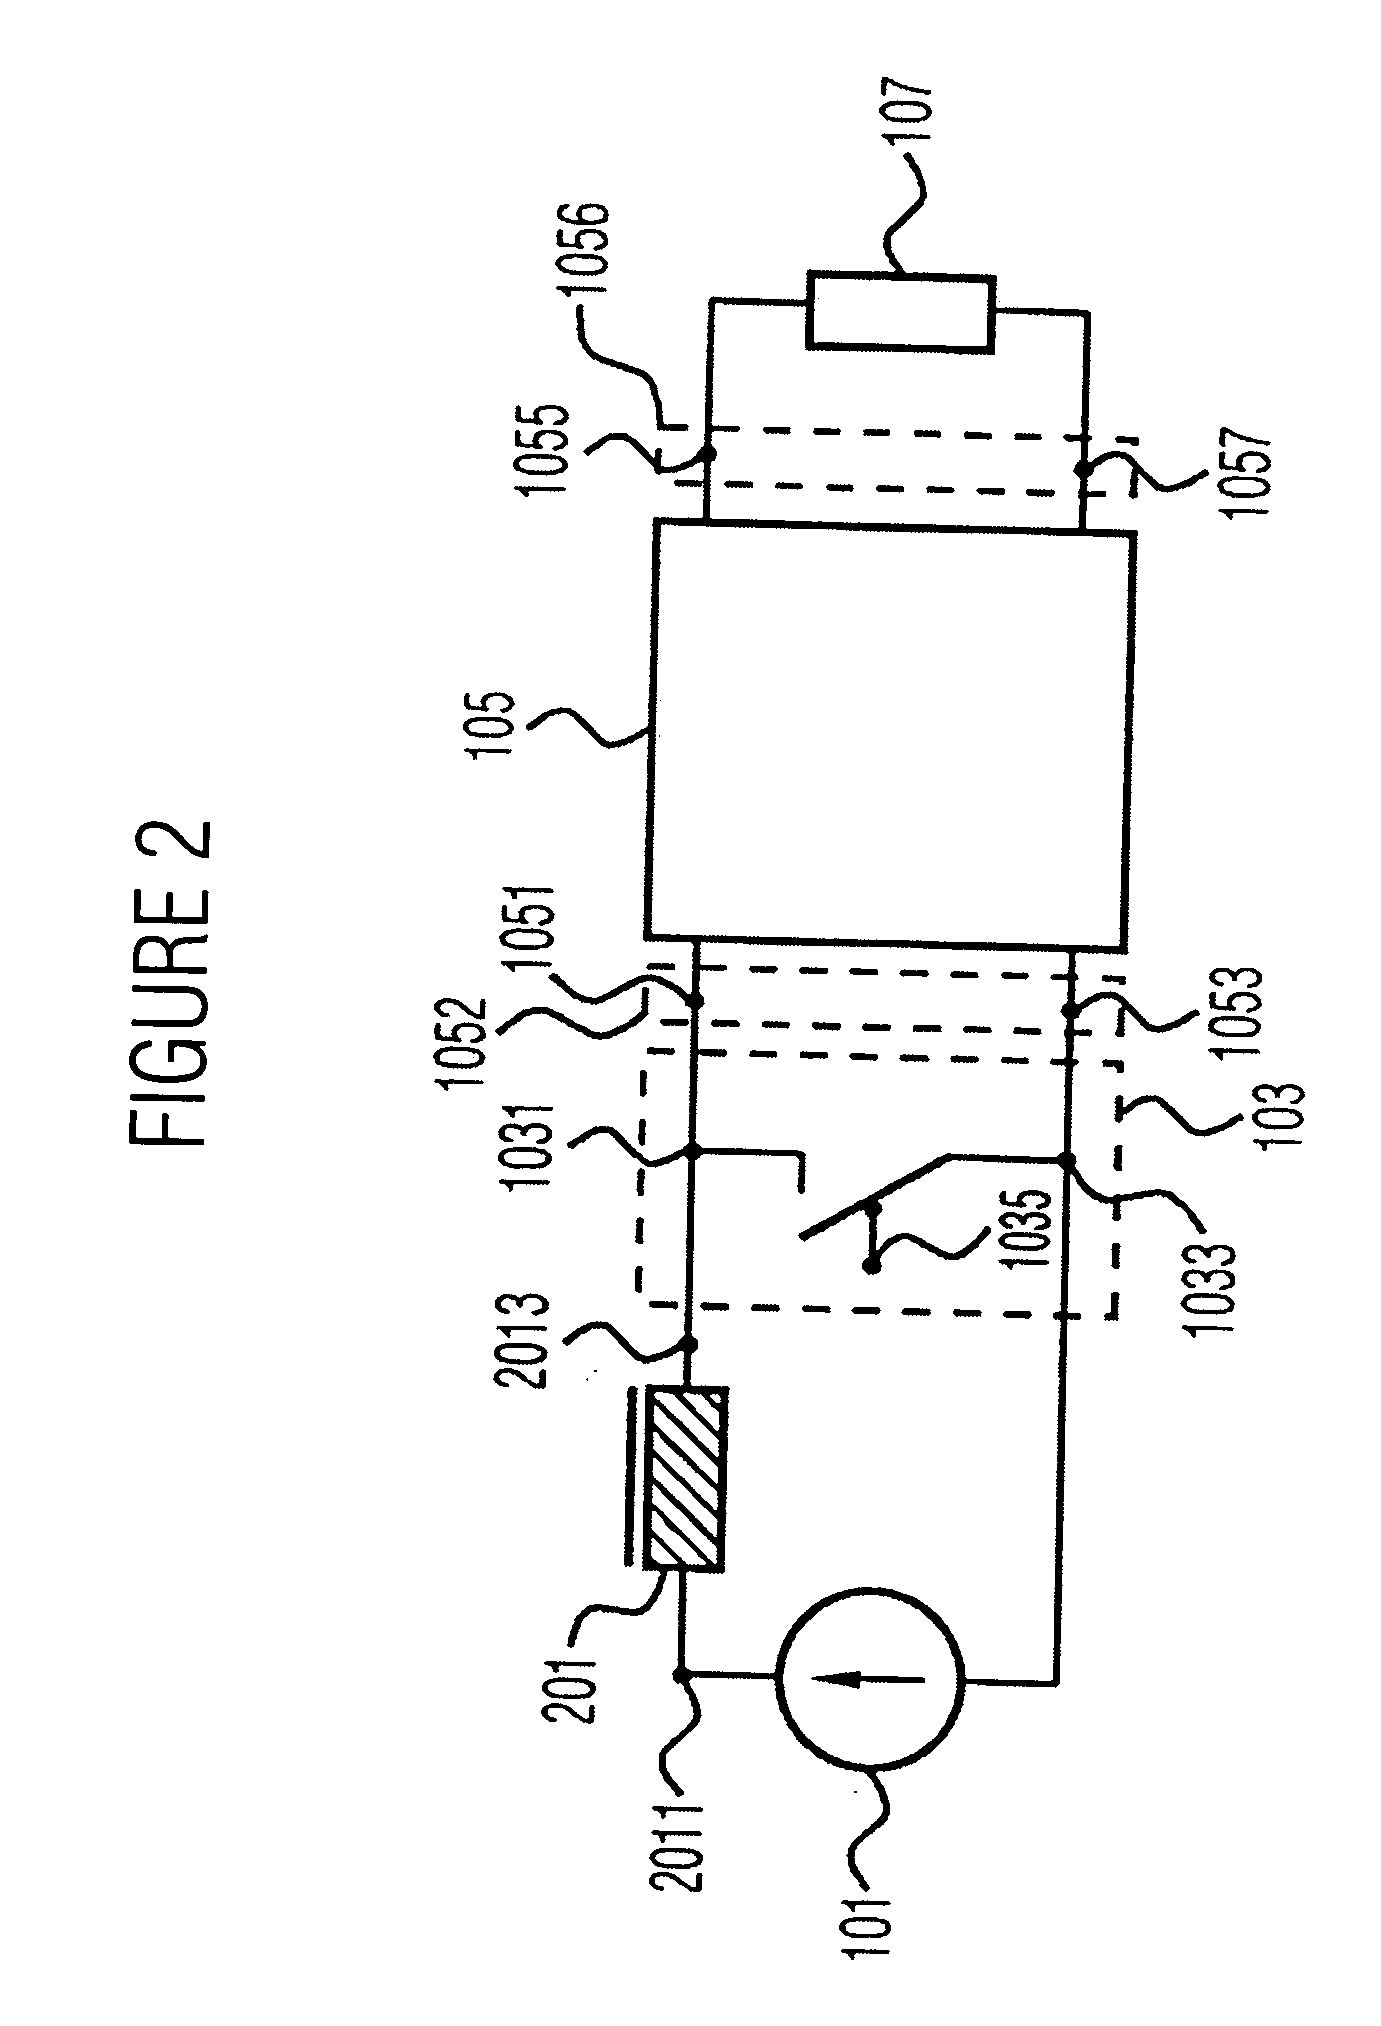 Resonance converter with voltage regulation and method of driving variable loads